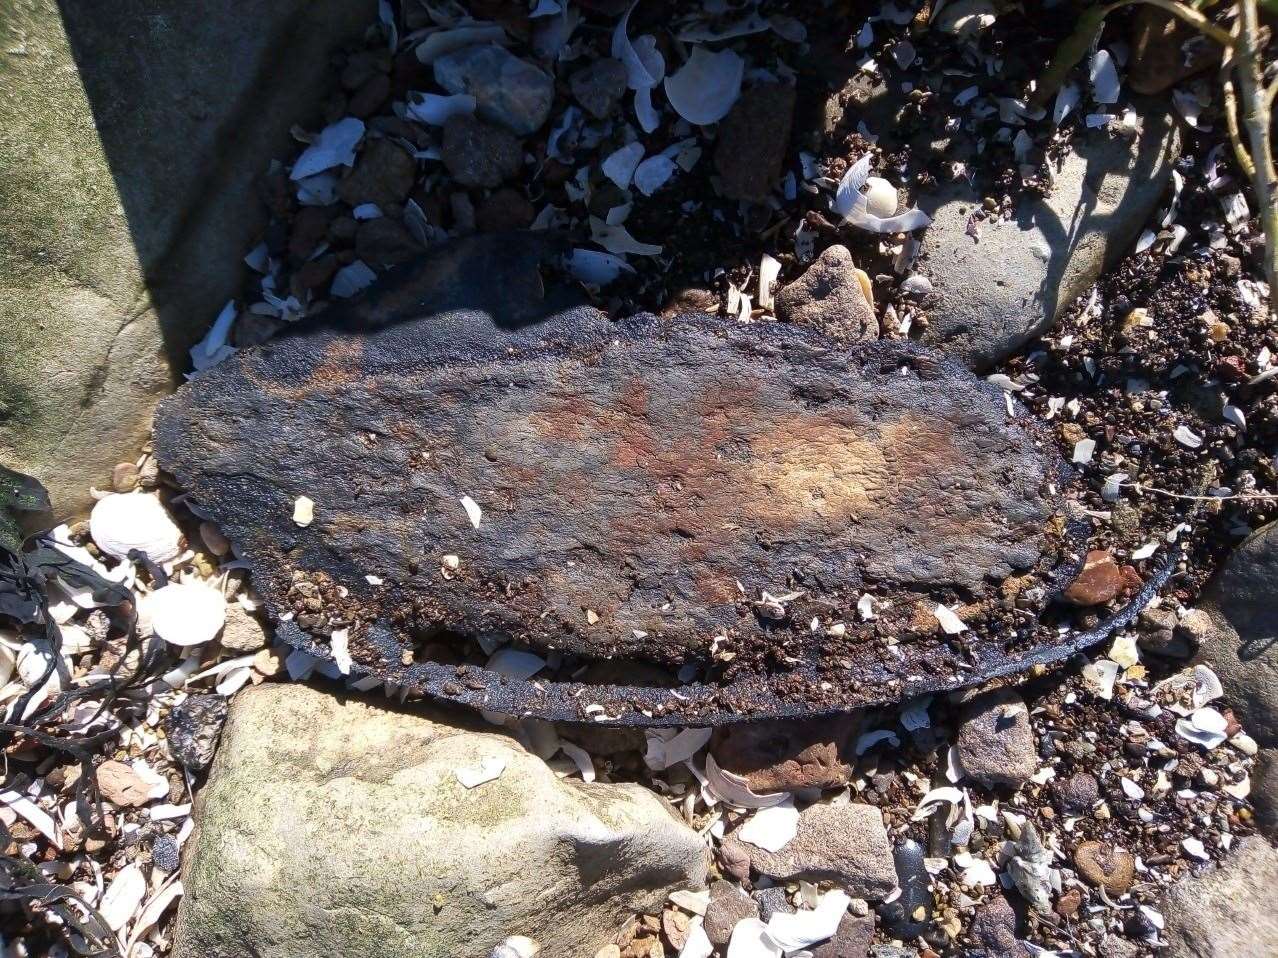 The shoe as it was found on a foreshore in North Kent. Picture: Steve Tomlinson